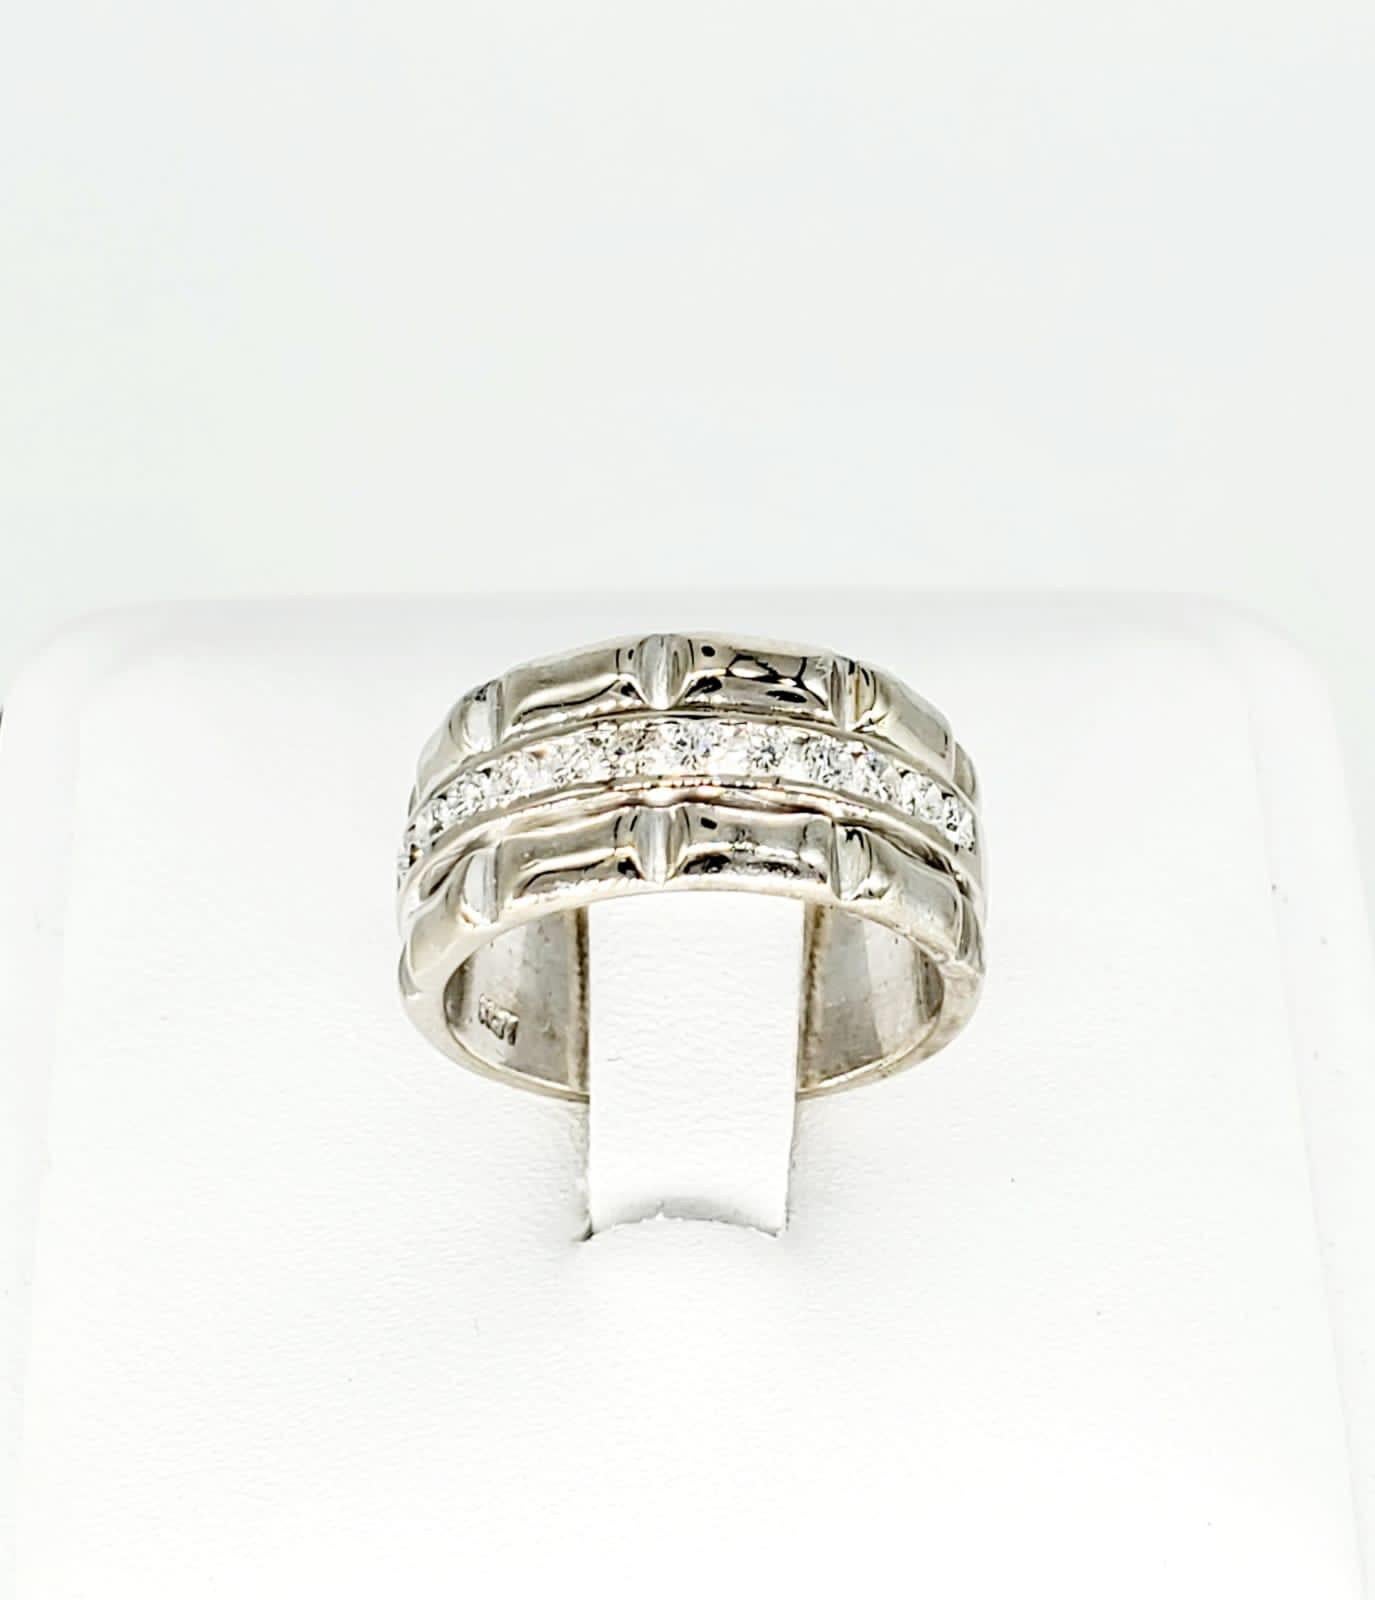 Vintage Half Eternity Diamond Band 18 Karat White Gold Ring In Excellent Condition For Sale In Miami, FL